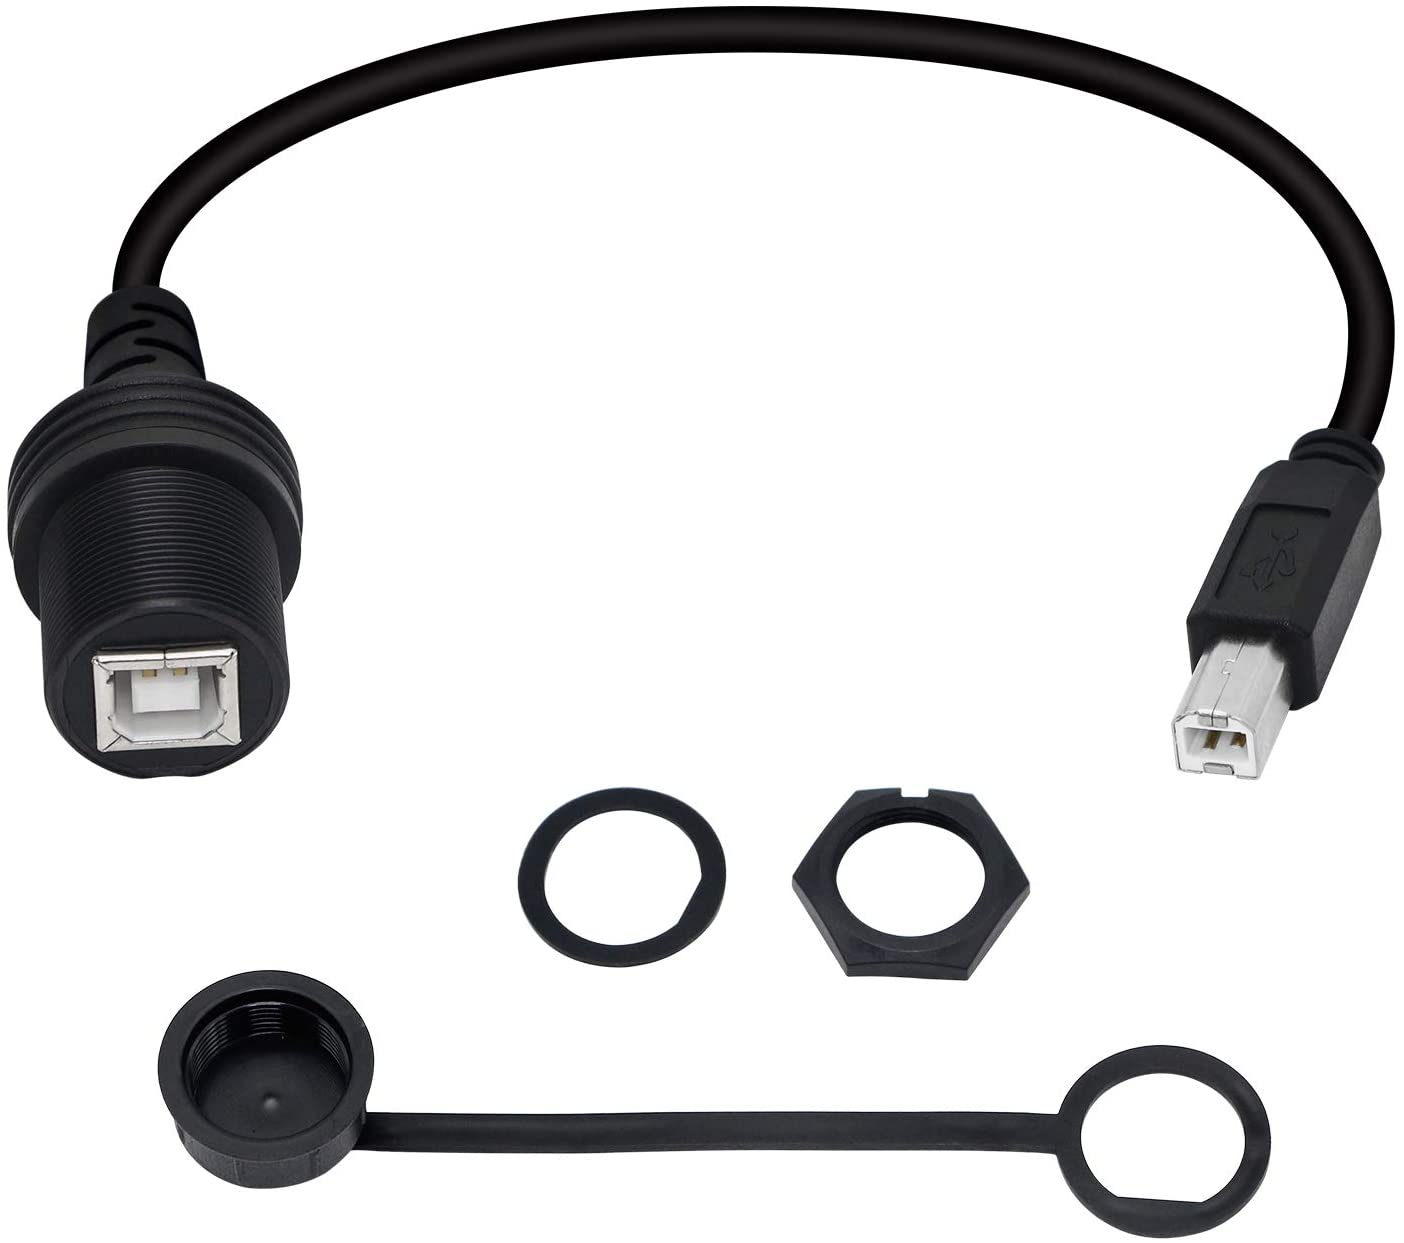 USB-B 2.0 Printer Scanner Male to Female Car Dash Flush Mount Extension Cable